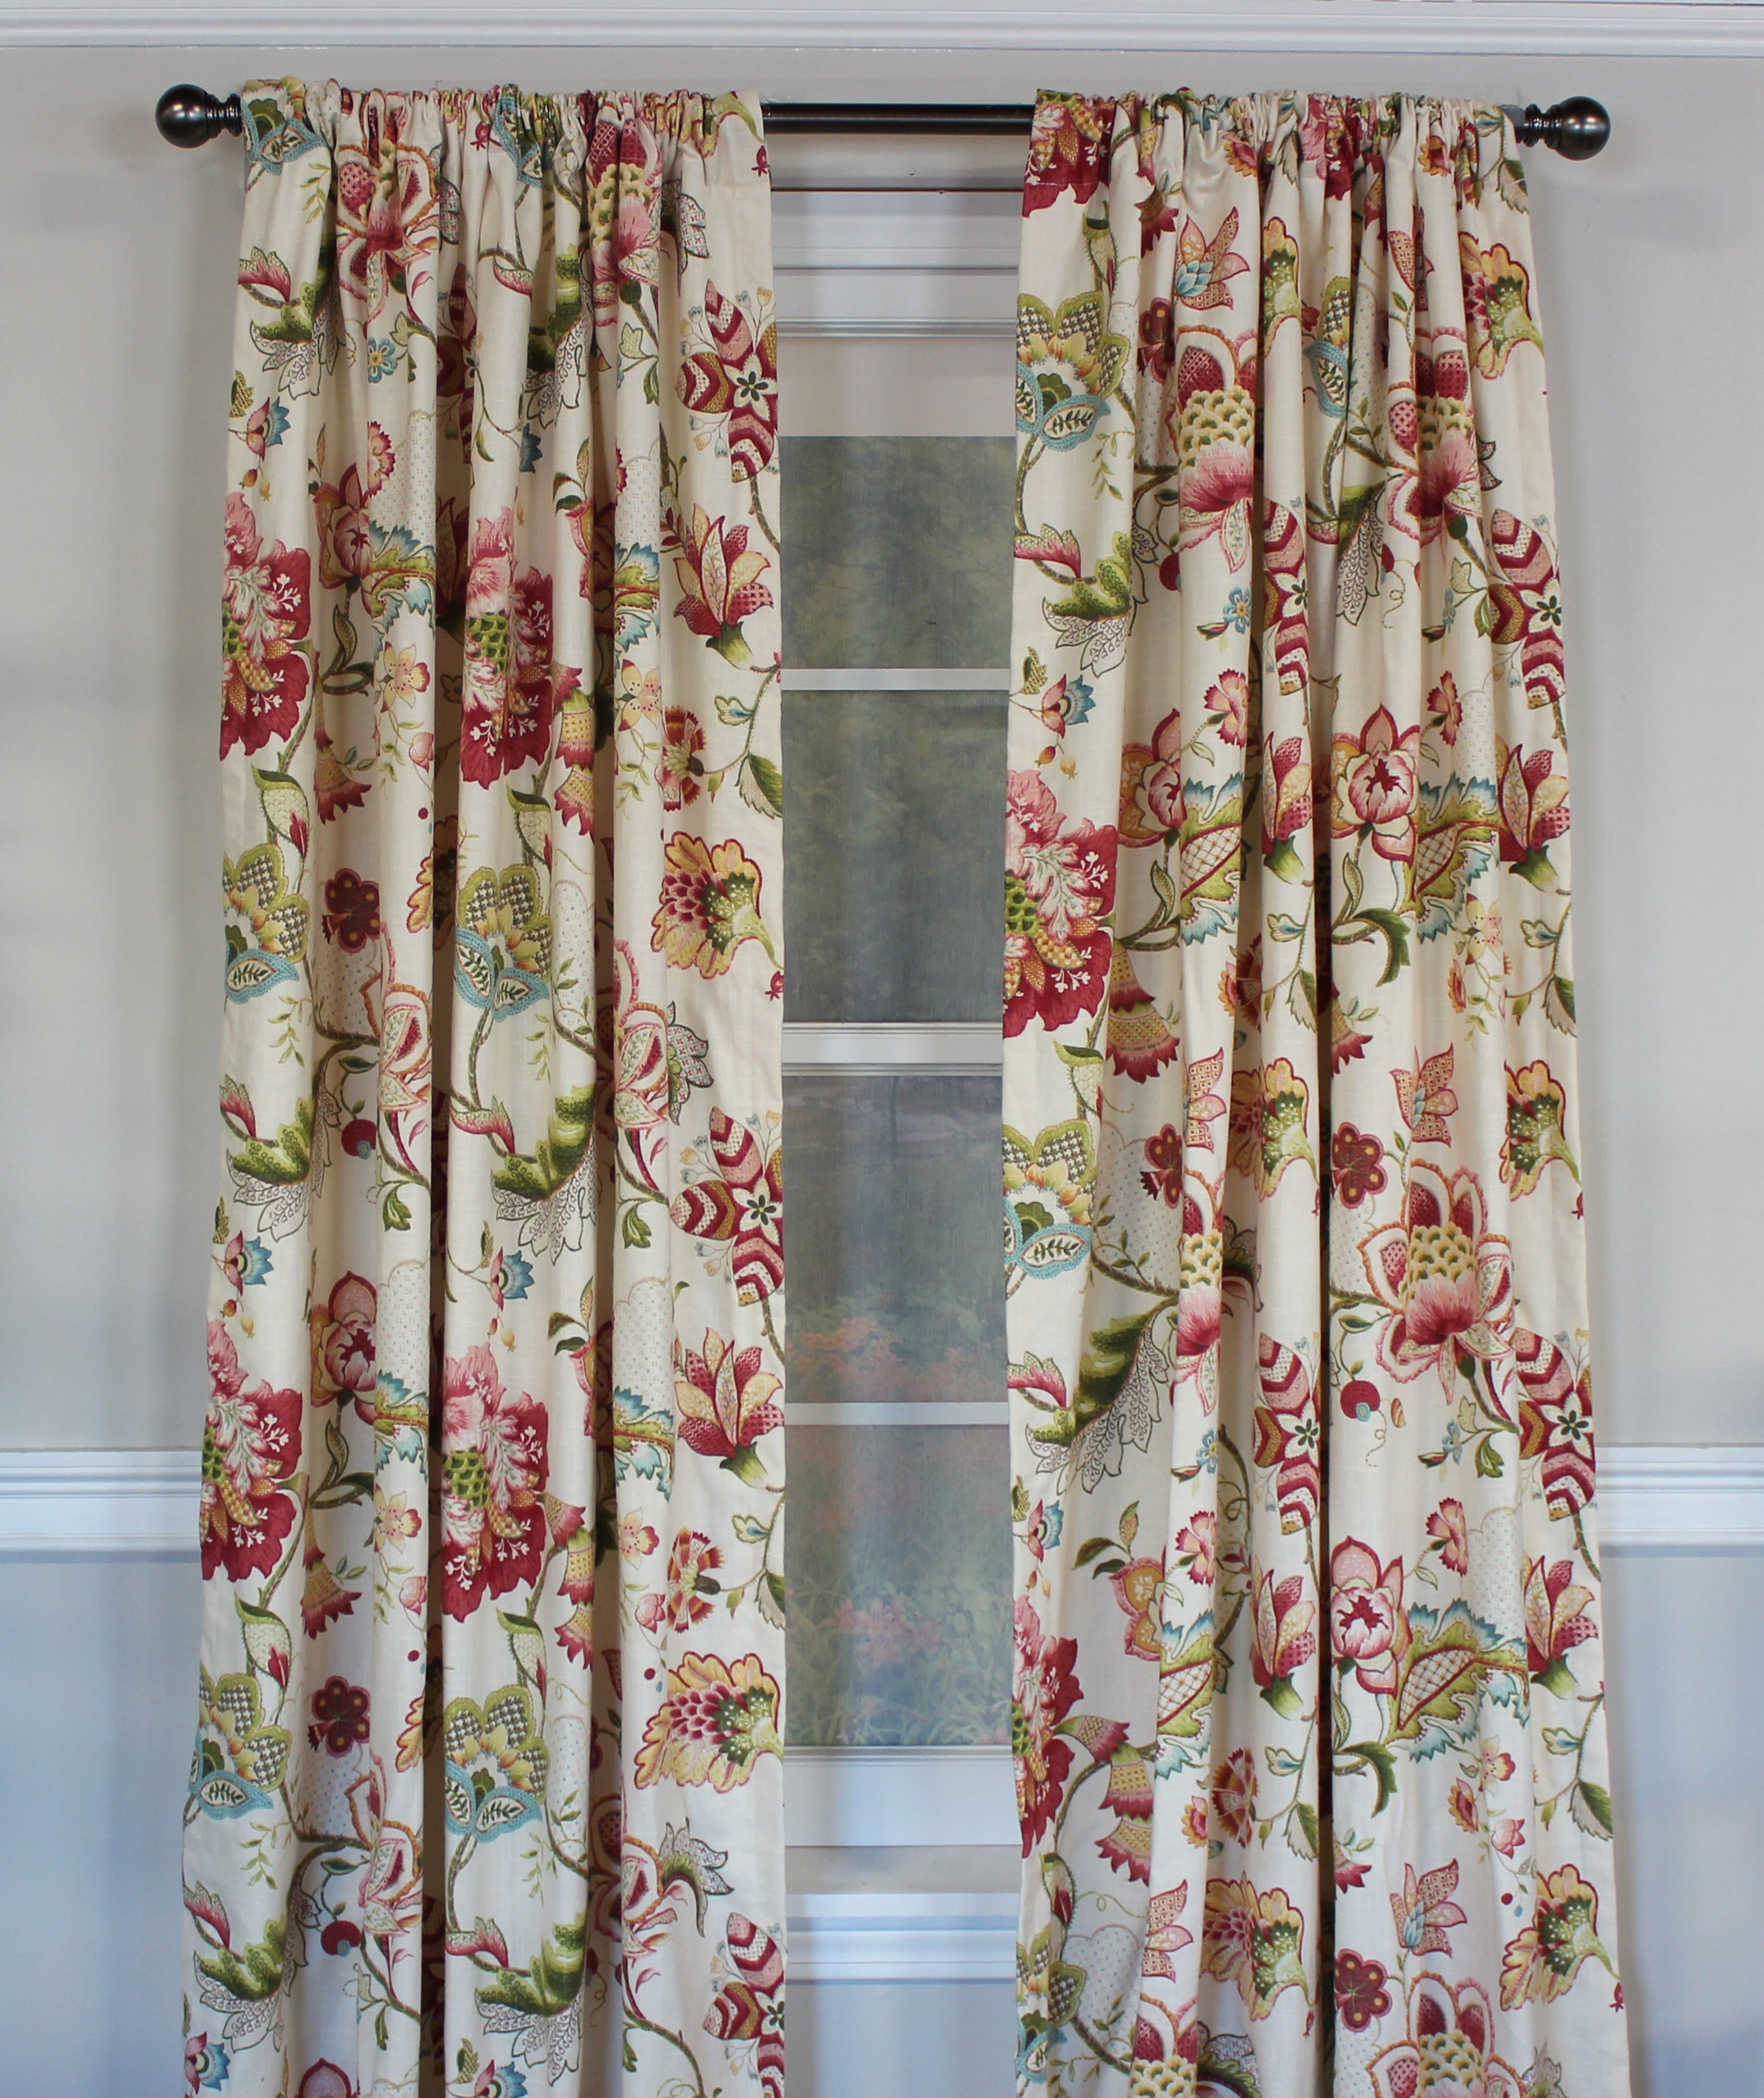 These panels are apart of our British Floral Collection. It is one of our best selling patterns that comes in either Blue or Rose. Pair these panels alone or with any of our British Floral Window Treatments. 